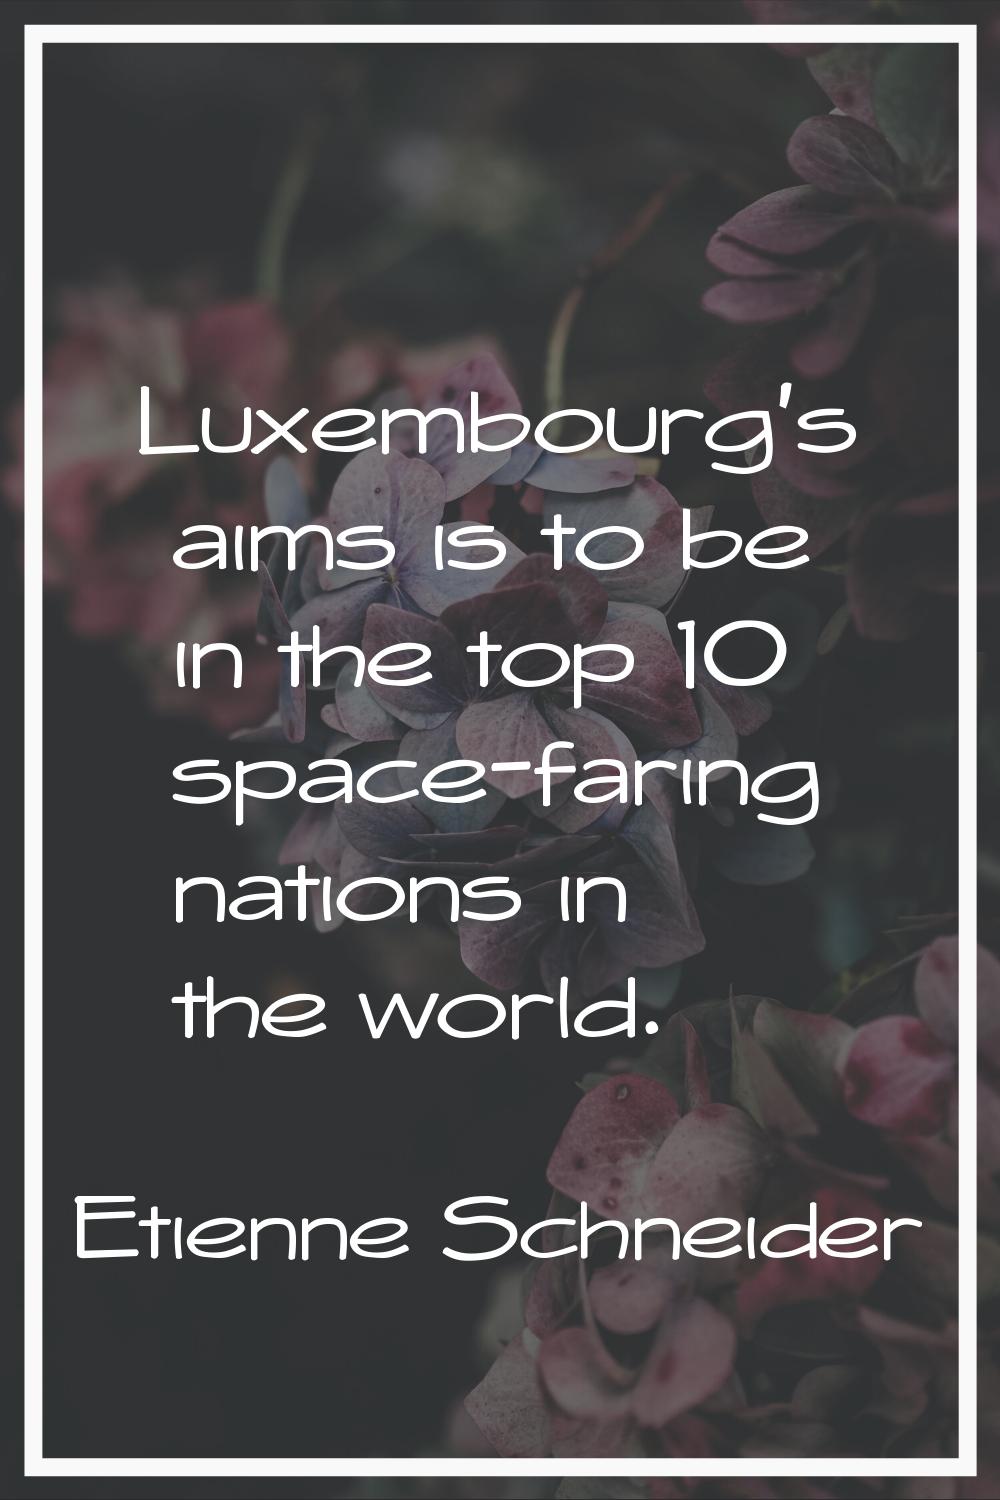 Luxembourg's aims is to be in the top 10 space-faring nations in the world.